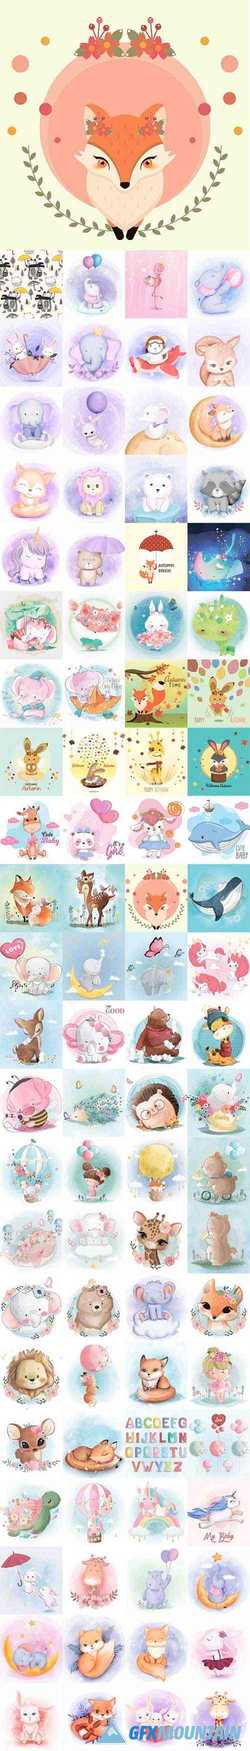 Cute Adorable Illustrations Vector Pack